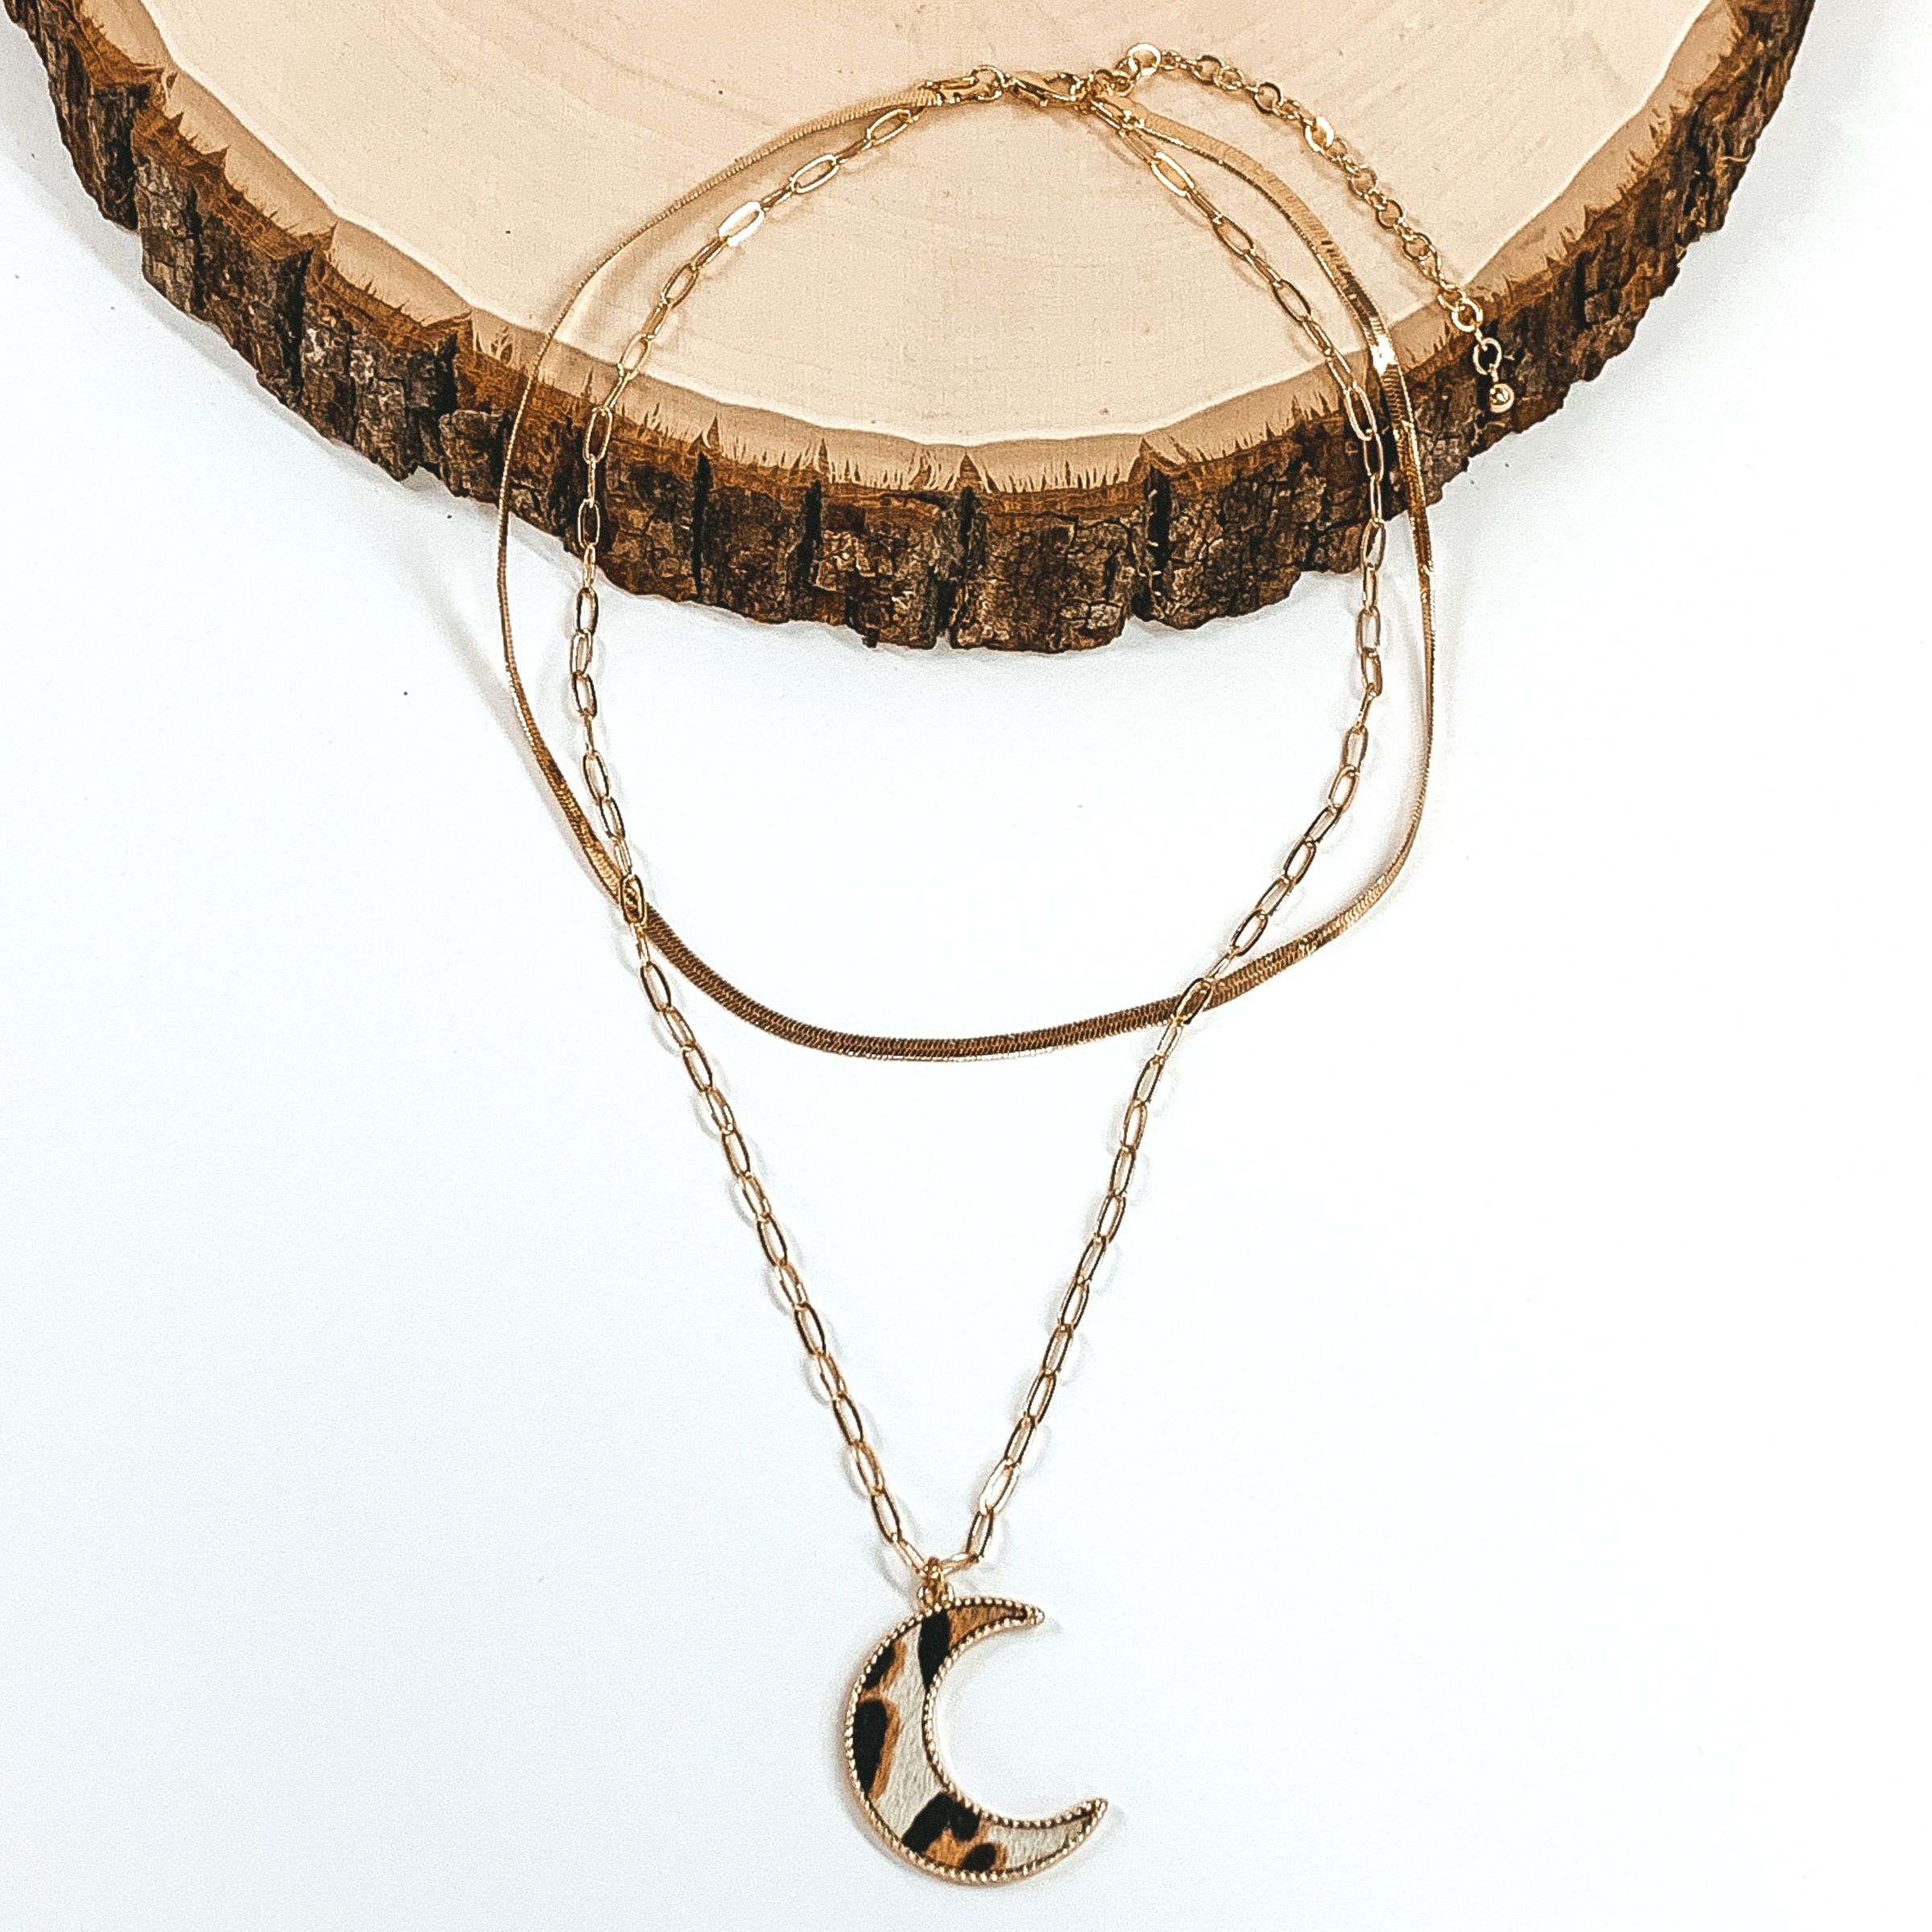 Gold paperclip doubled chain with a moon pendant. The pendant has a white hide inlay with an animal print. This necklace is pictured laying on a piece of wood on a white background.